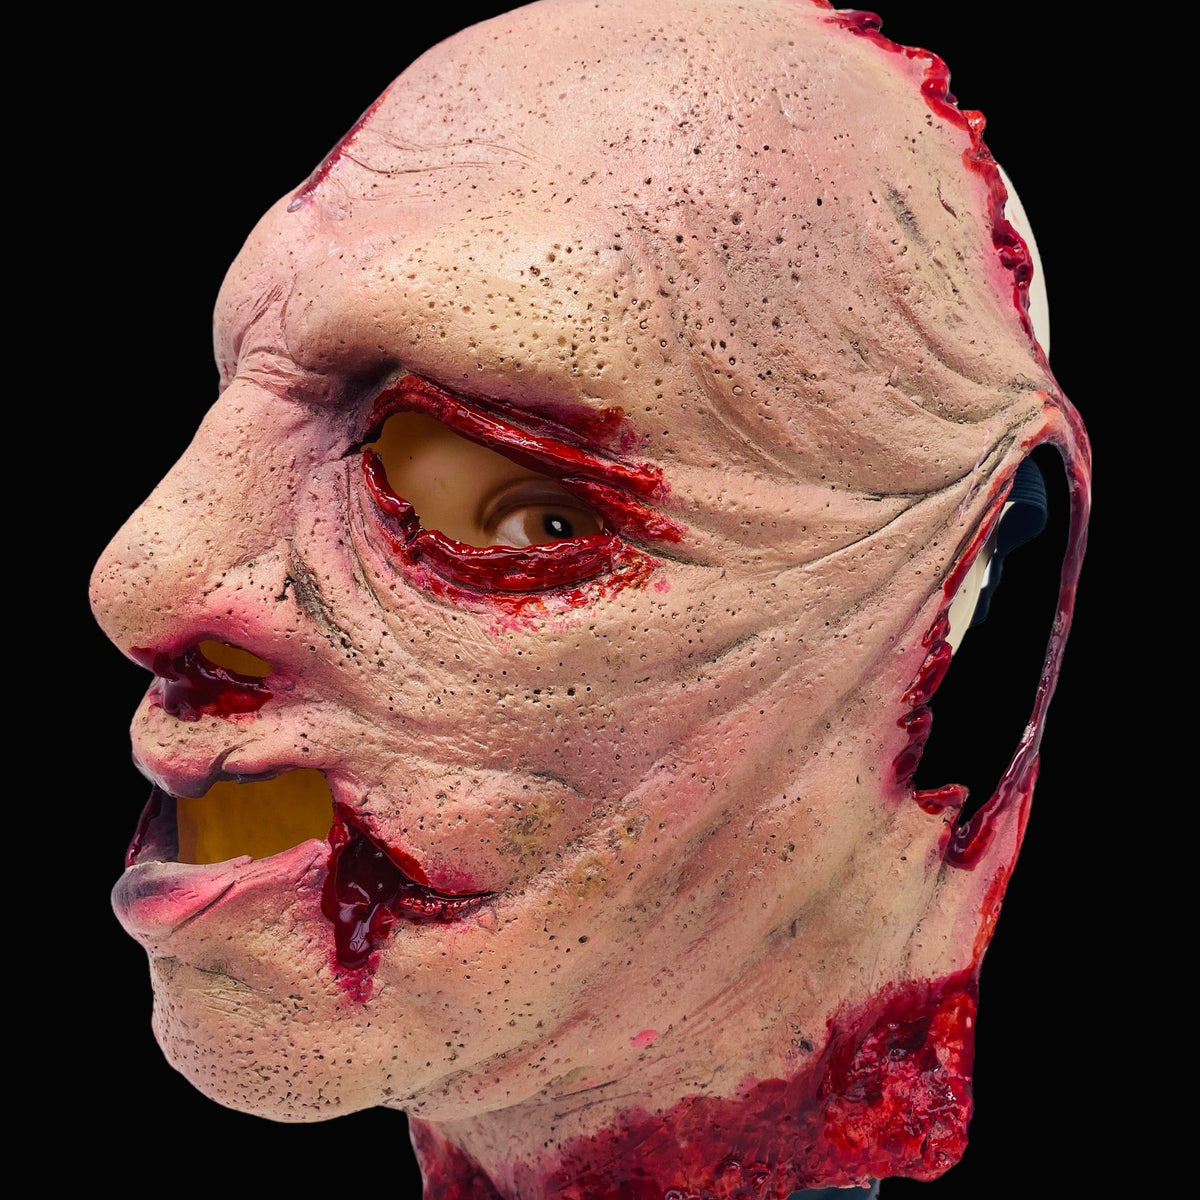 Texas Butcher Bloody Skinned Face Mask